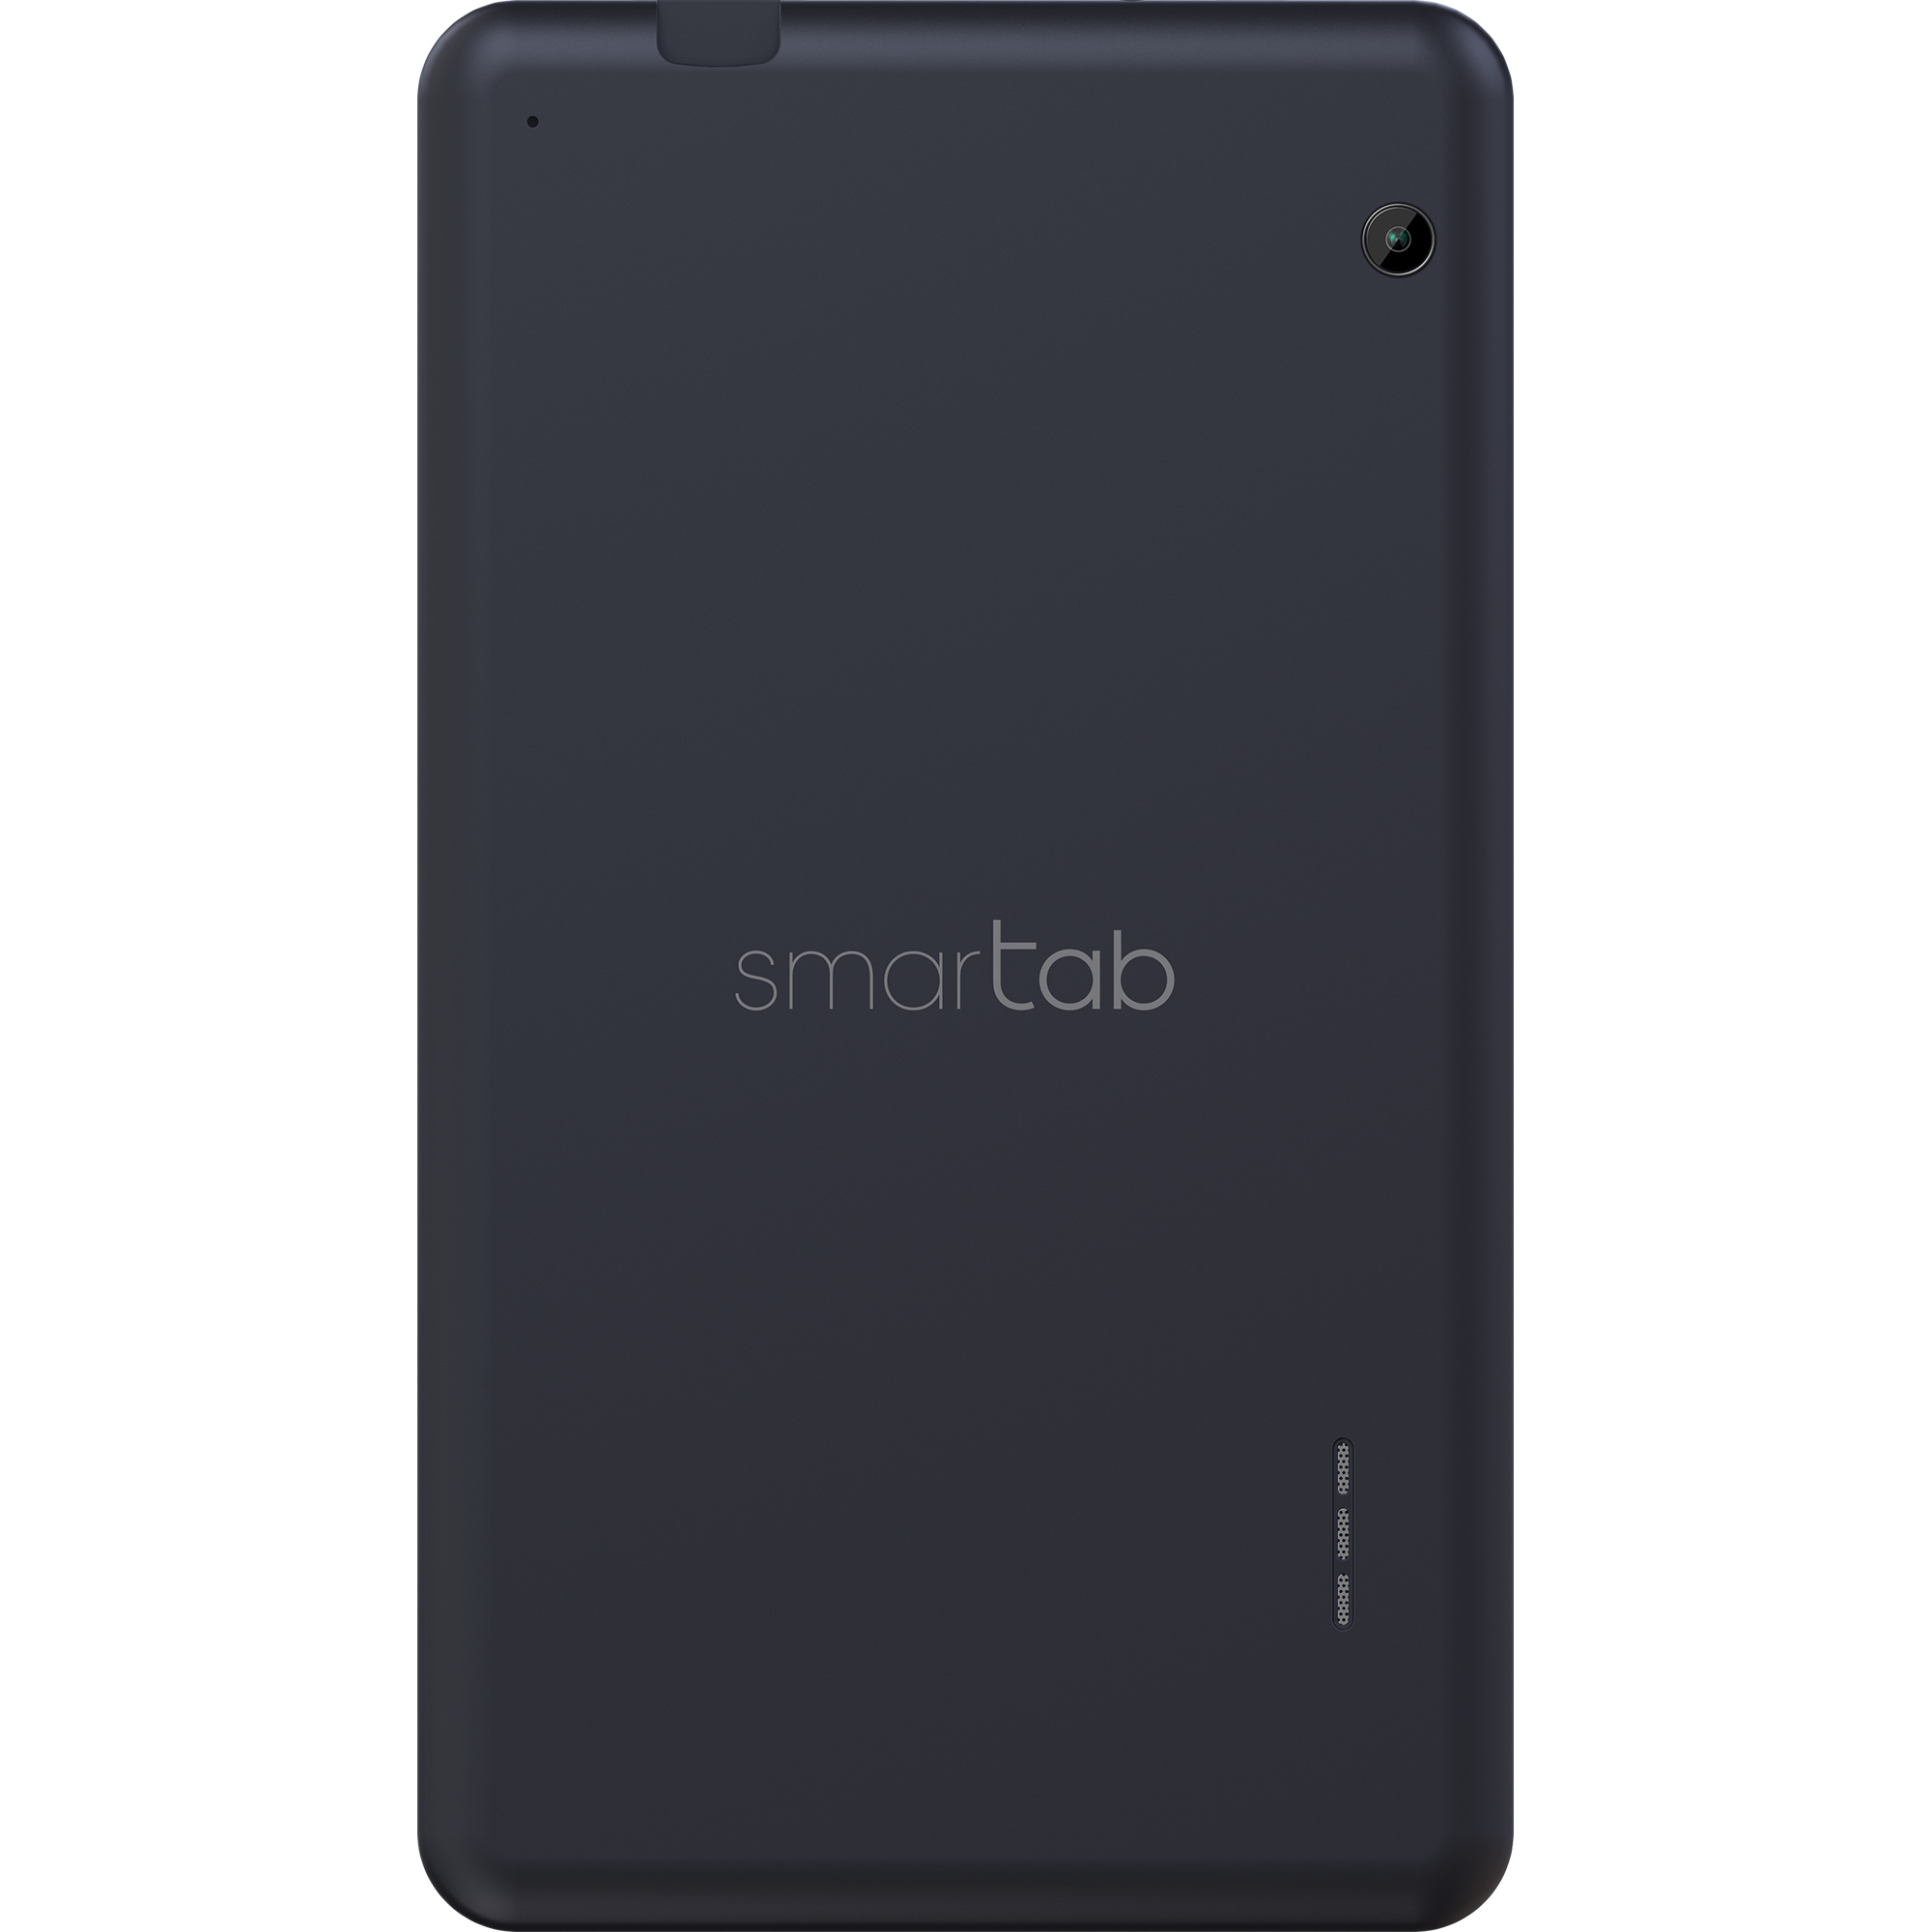 SmarTab 7" 16GB Tablet Android OS - Black- ST7150 - image 4 of 4